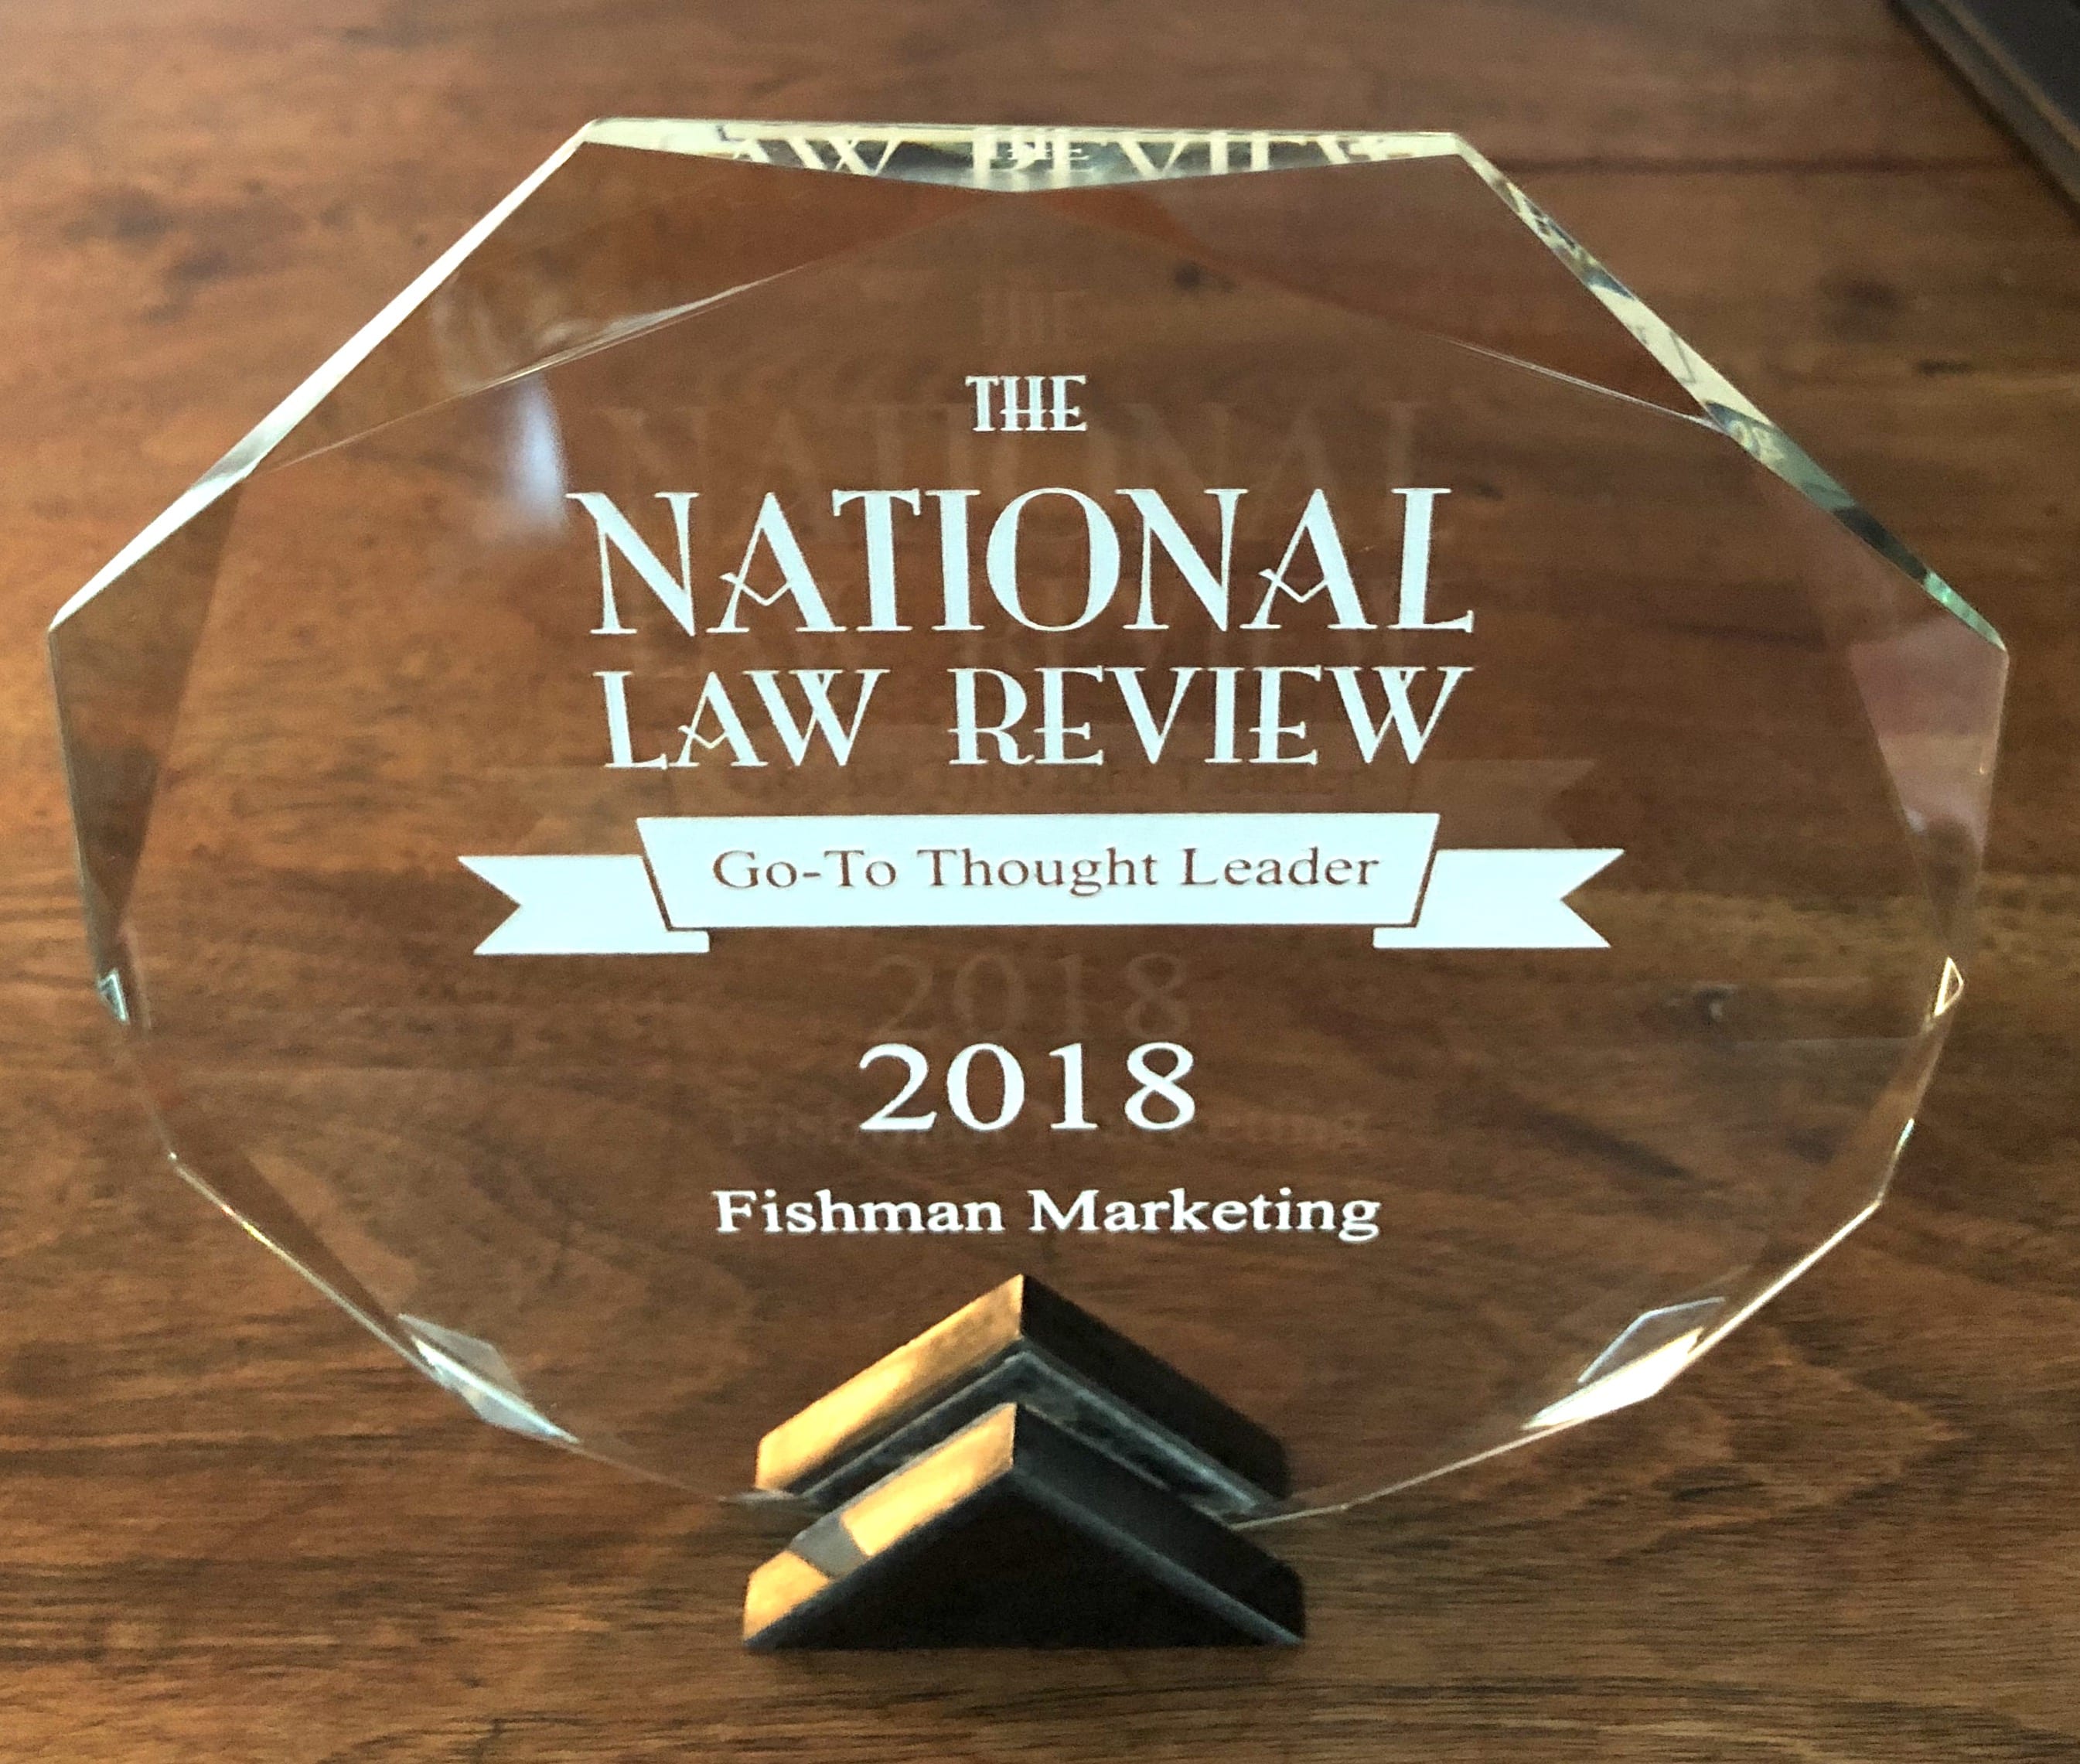 The National Law Review’s 2018 “Go-To Thought Leader” Award